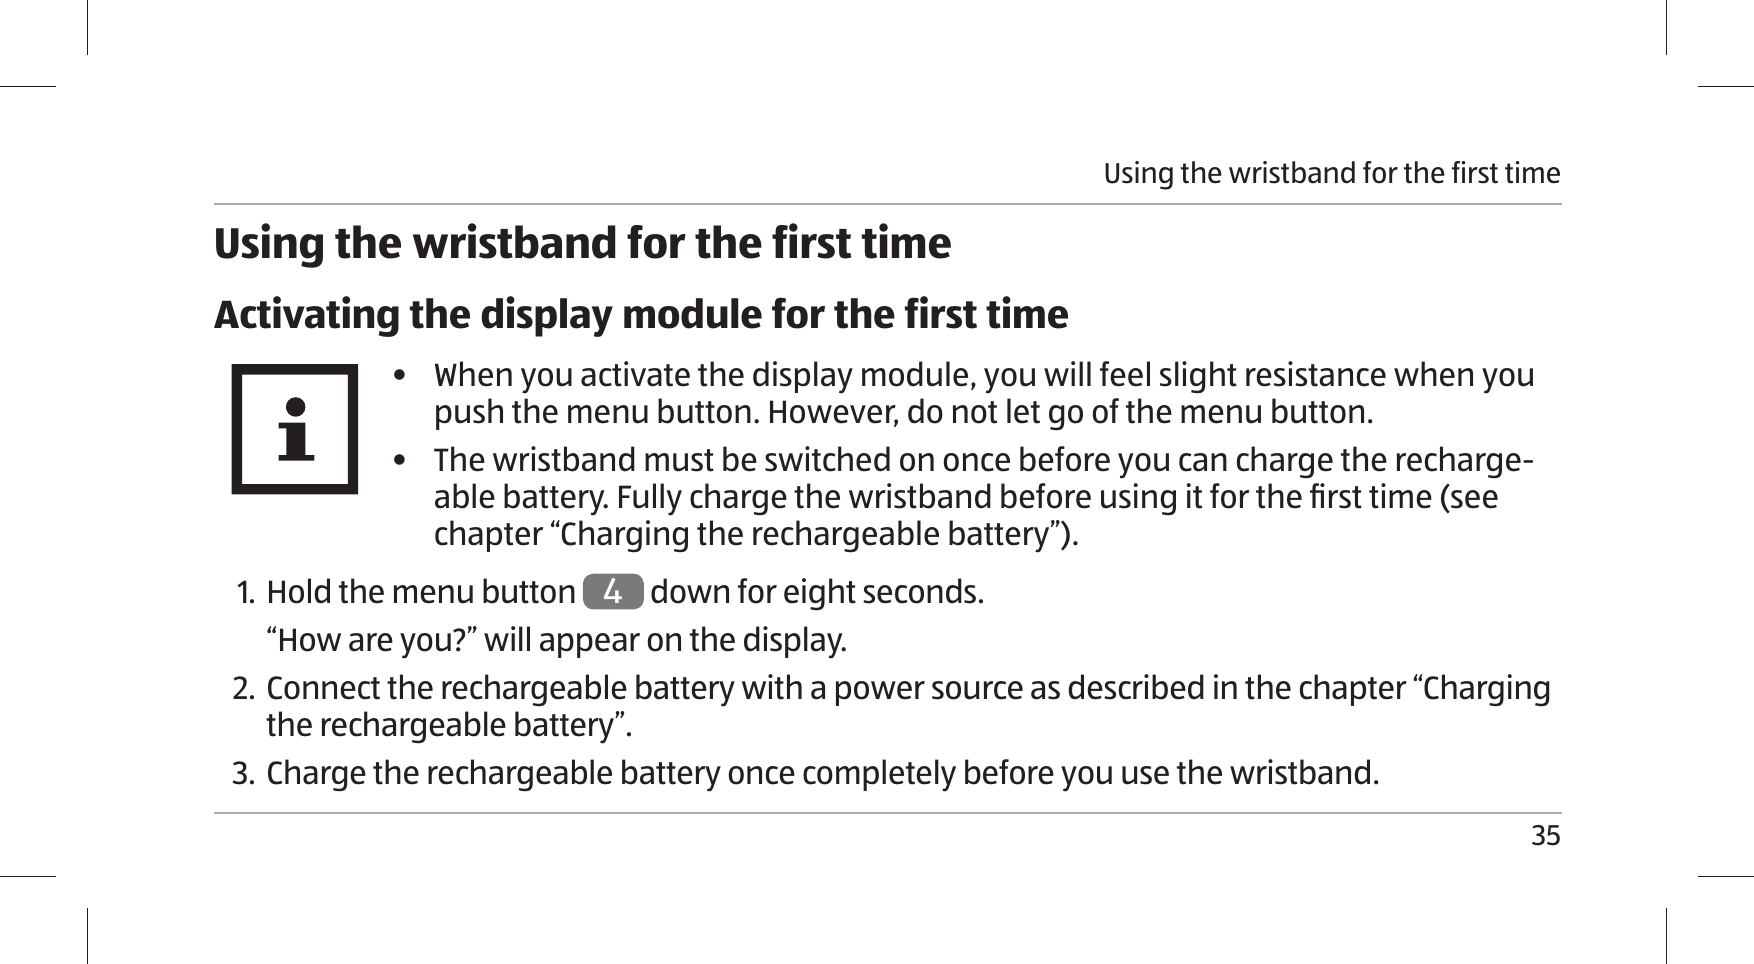 Using the wristband for the first time35Using the wristband for the first timeActivating the display module for the first time•  When you activate the display module, you will feel slight resistance when you push the menu button. However, do not let go of the menu button. •  The wristband must be switched on once before you can charge the recharge-able battery. Fully charge the wristband before using it for the ﬁ rst time (see chapter “Charging the rechargeable battery”).1. Hold the menu button 4 down for eight seconds.“How are you?” will appear on the display.2. Connect the rechargeable battery with a power source as described in the chapter “Charging the rechargeable battery”.3.  Charge the rechargeable battery once completely before you use the wristband.